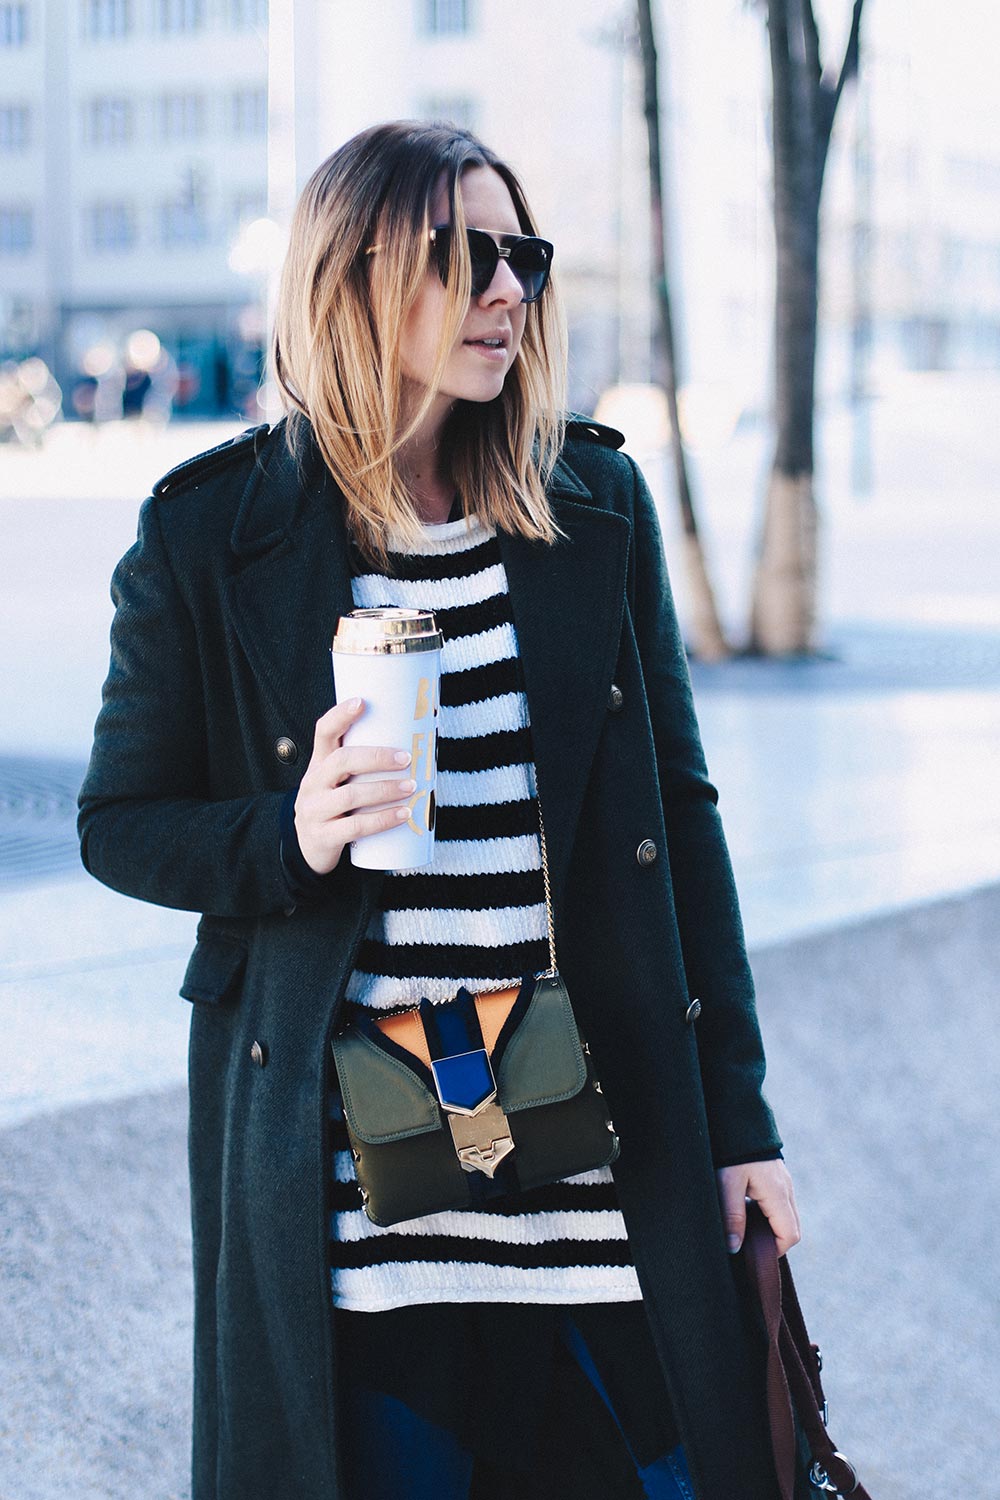 Jimmy Choo Lockett Petite Bag und Balenciaga Ceinture Boots, Skinny Jeans, Winter Streetstyle, Coffe To Go, But First Coffee, Frenchie, Fashion Blog, Modeblog, Outfit Blog, whoismocca.com